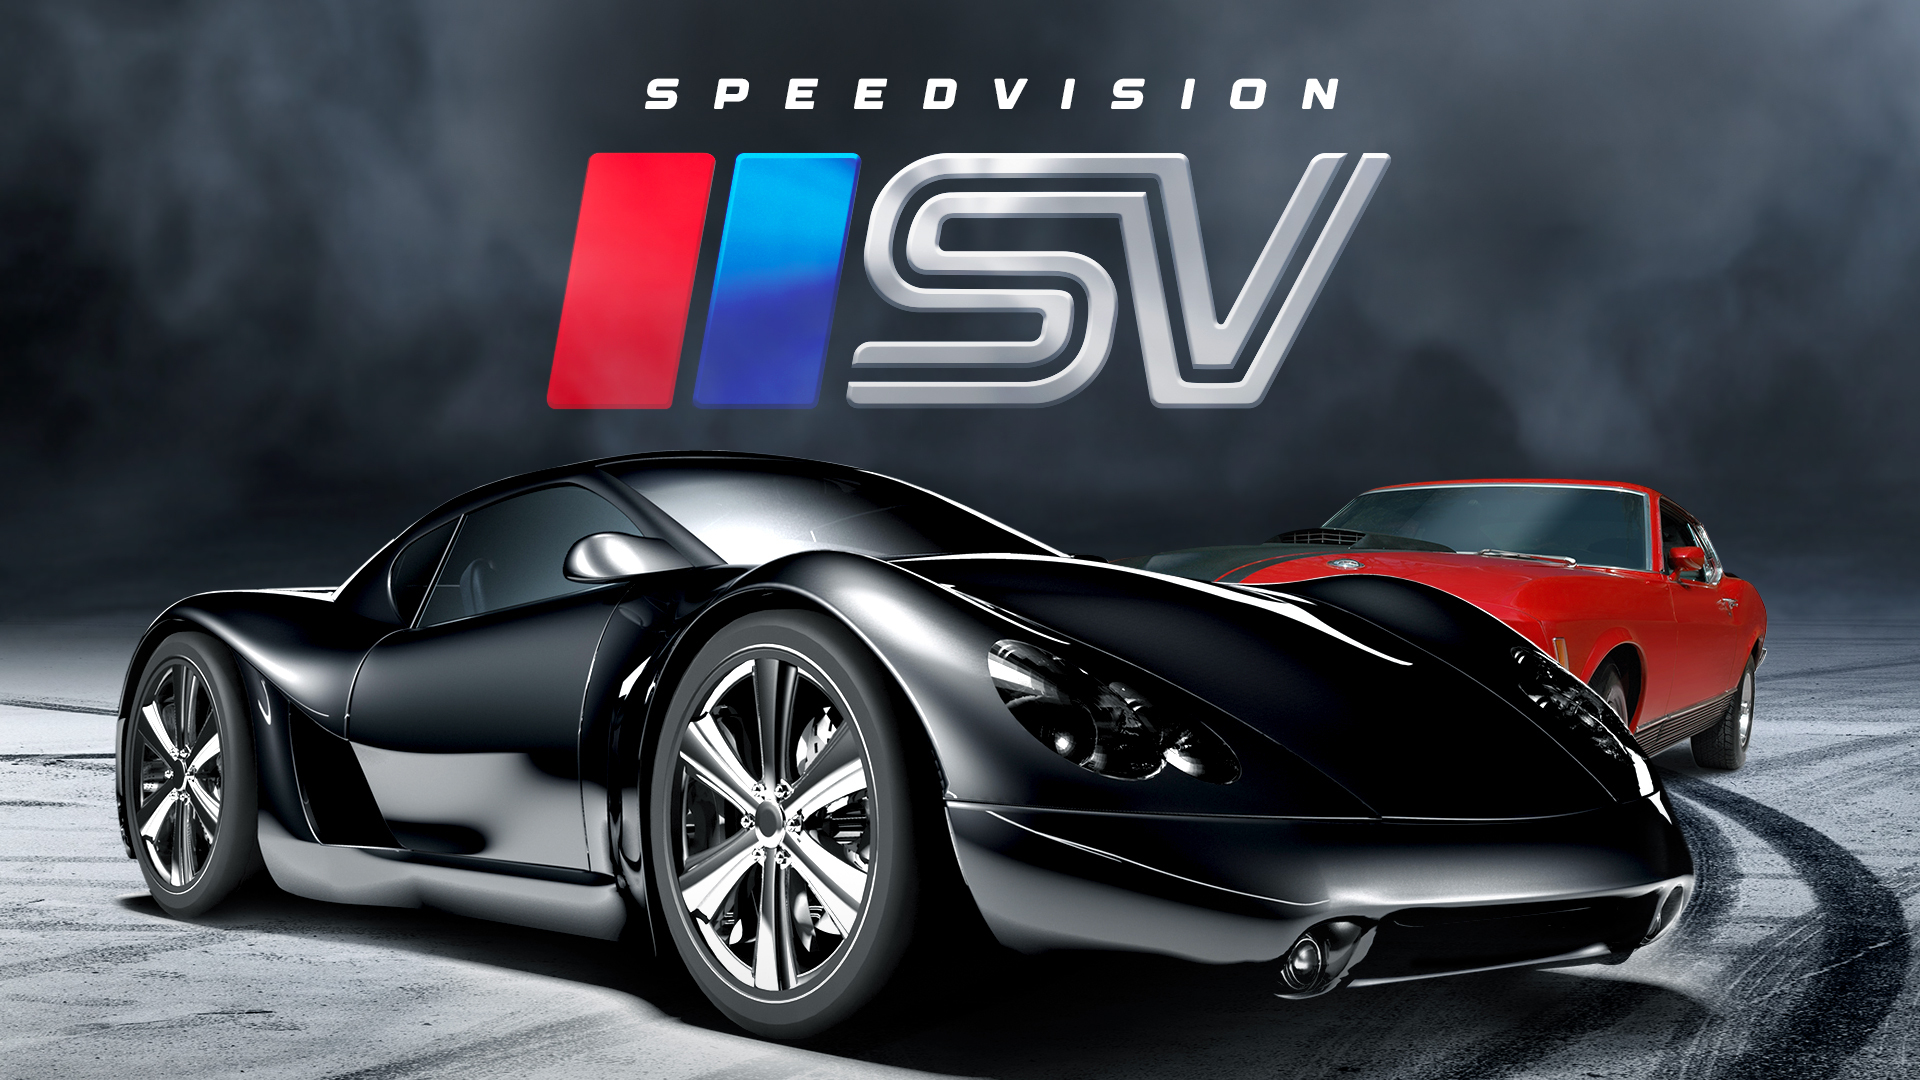 Speedvision Is Now Free To Watch With Ads on Google TV